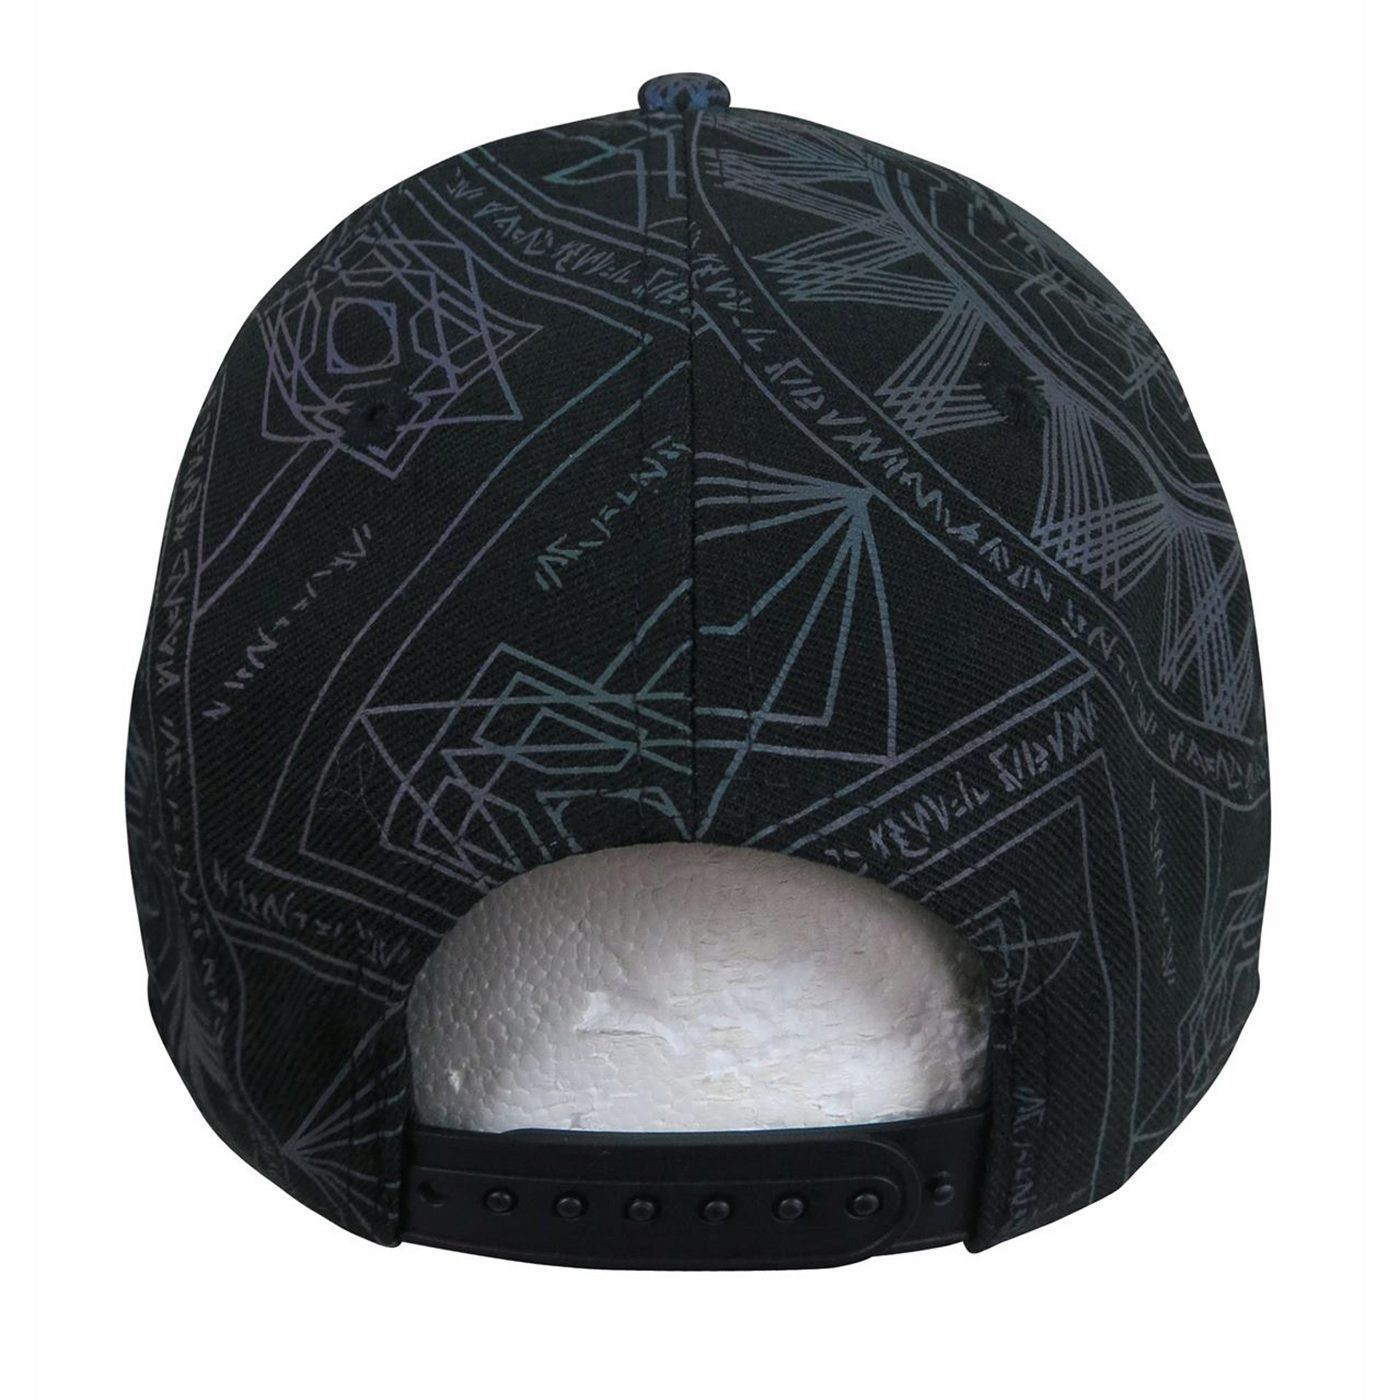 Dr. Strange Agamotto All Over Print 9Fifty Snapback Hat